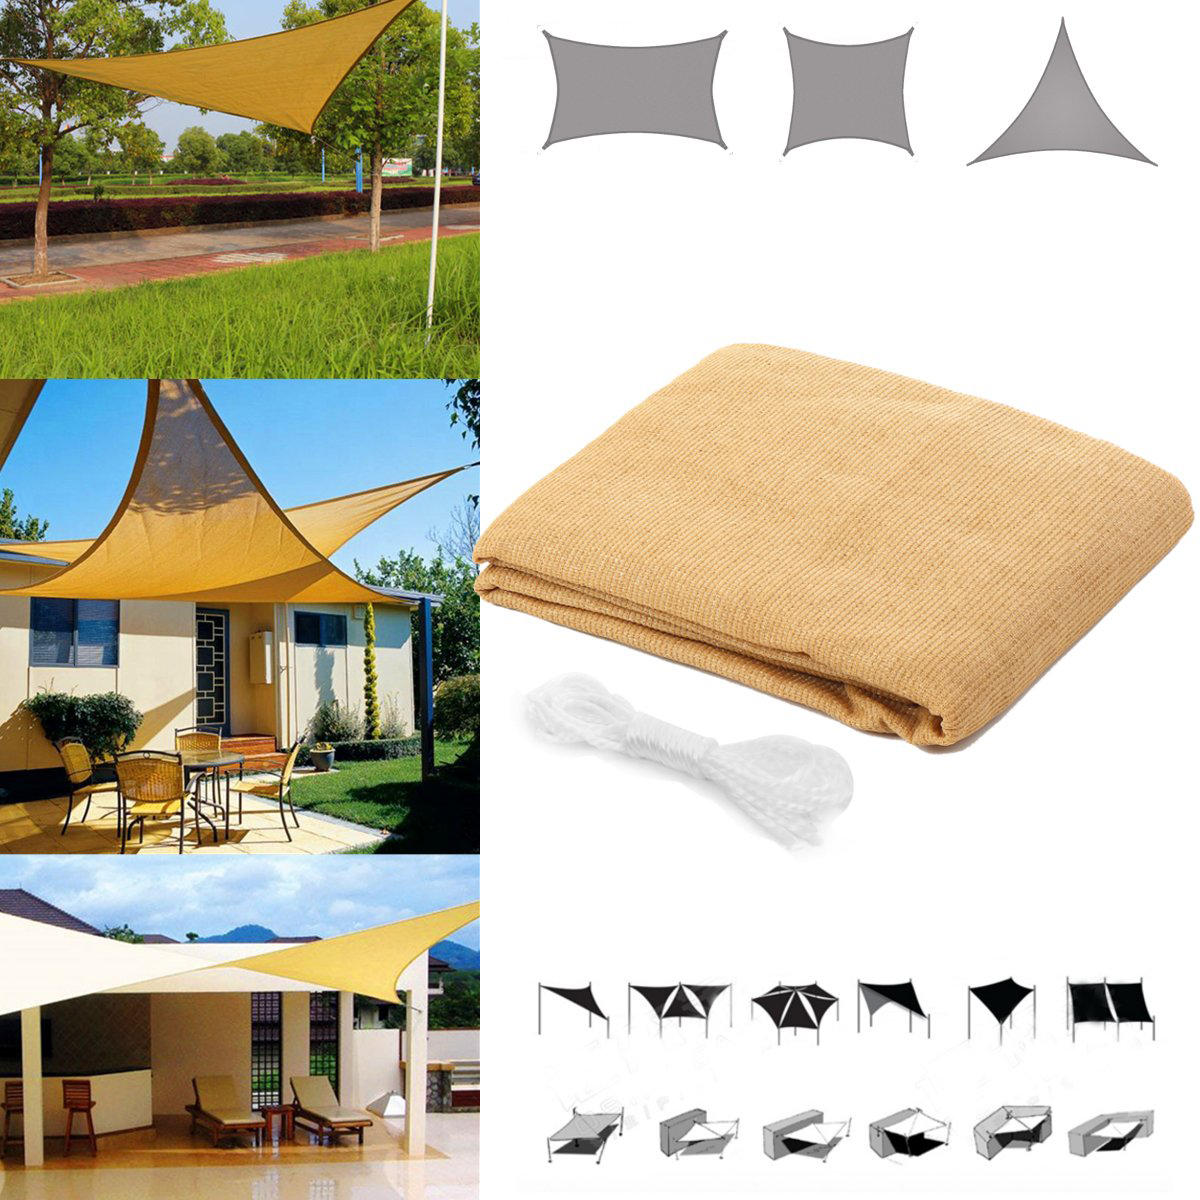 Quadrangle/Triangle Tent Sun Shade Anti UV Waterproof Canopy Cover Awning Garden Patio Camping Outdoor 